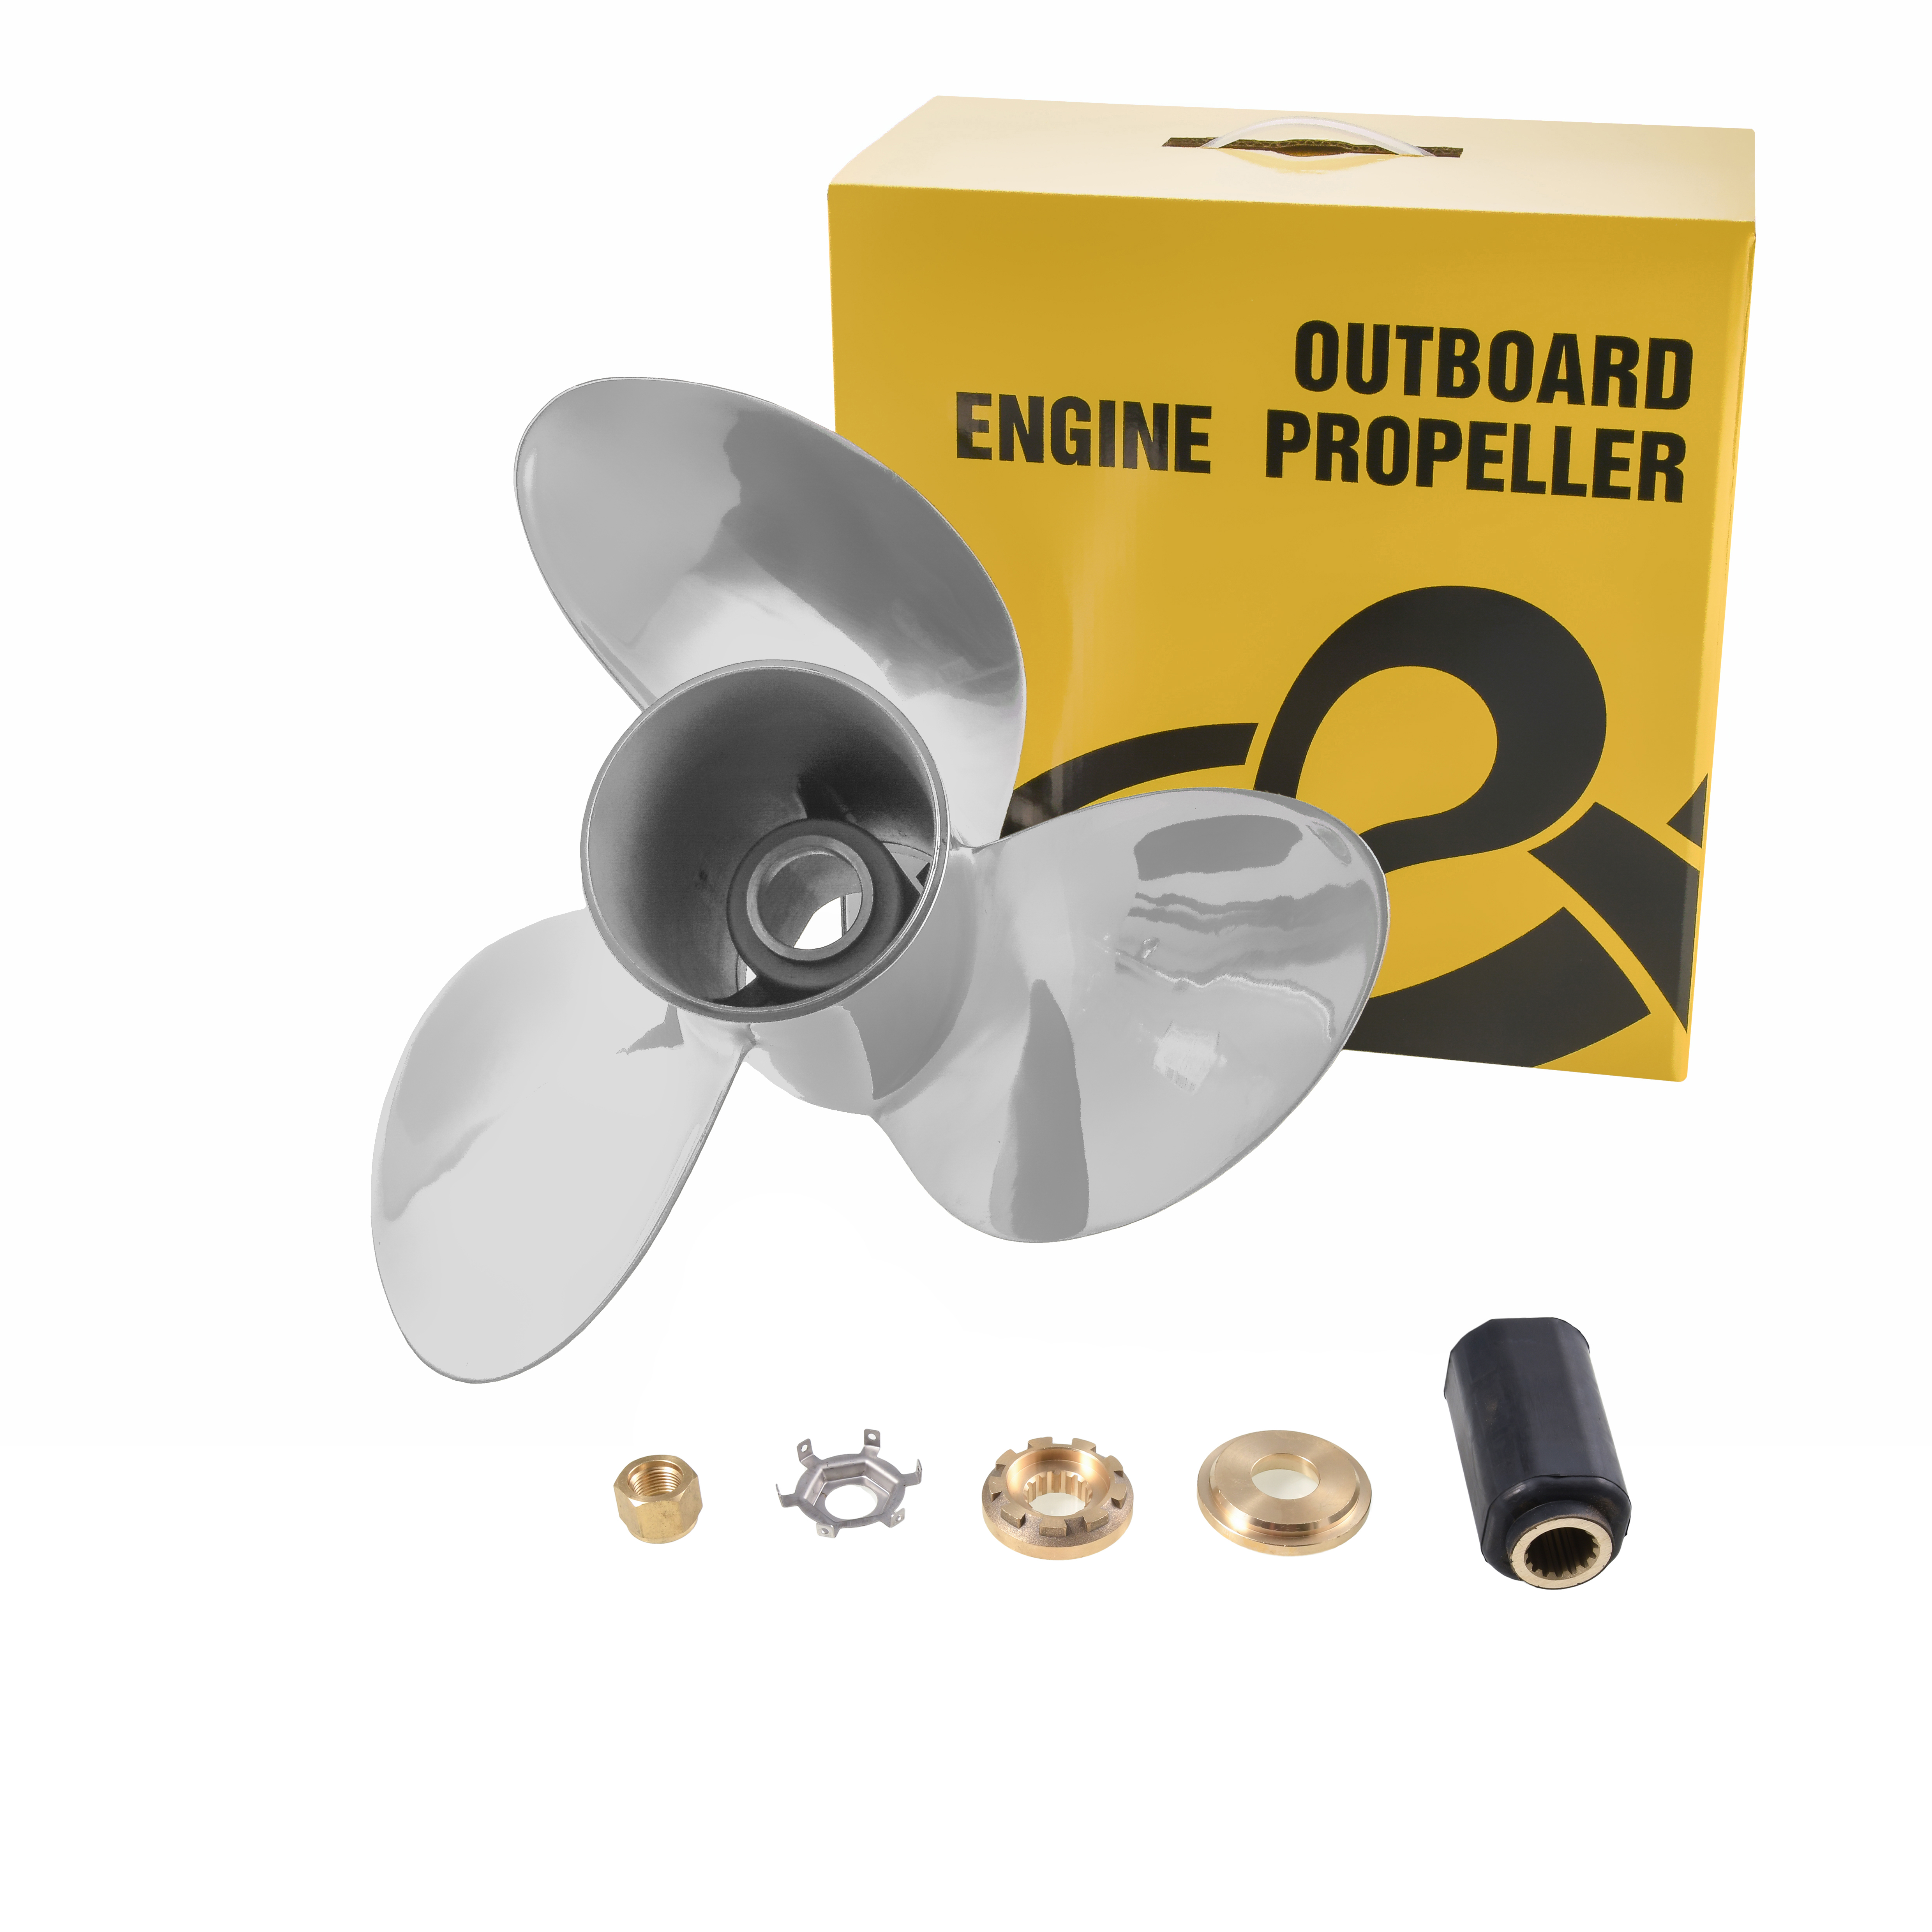 Interchangeable 90CT-400 Stainless Steel Outboard Propeller for Mercury